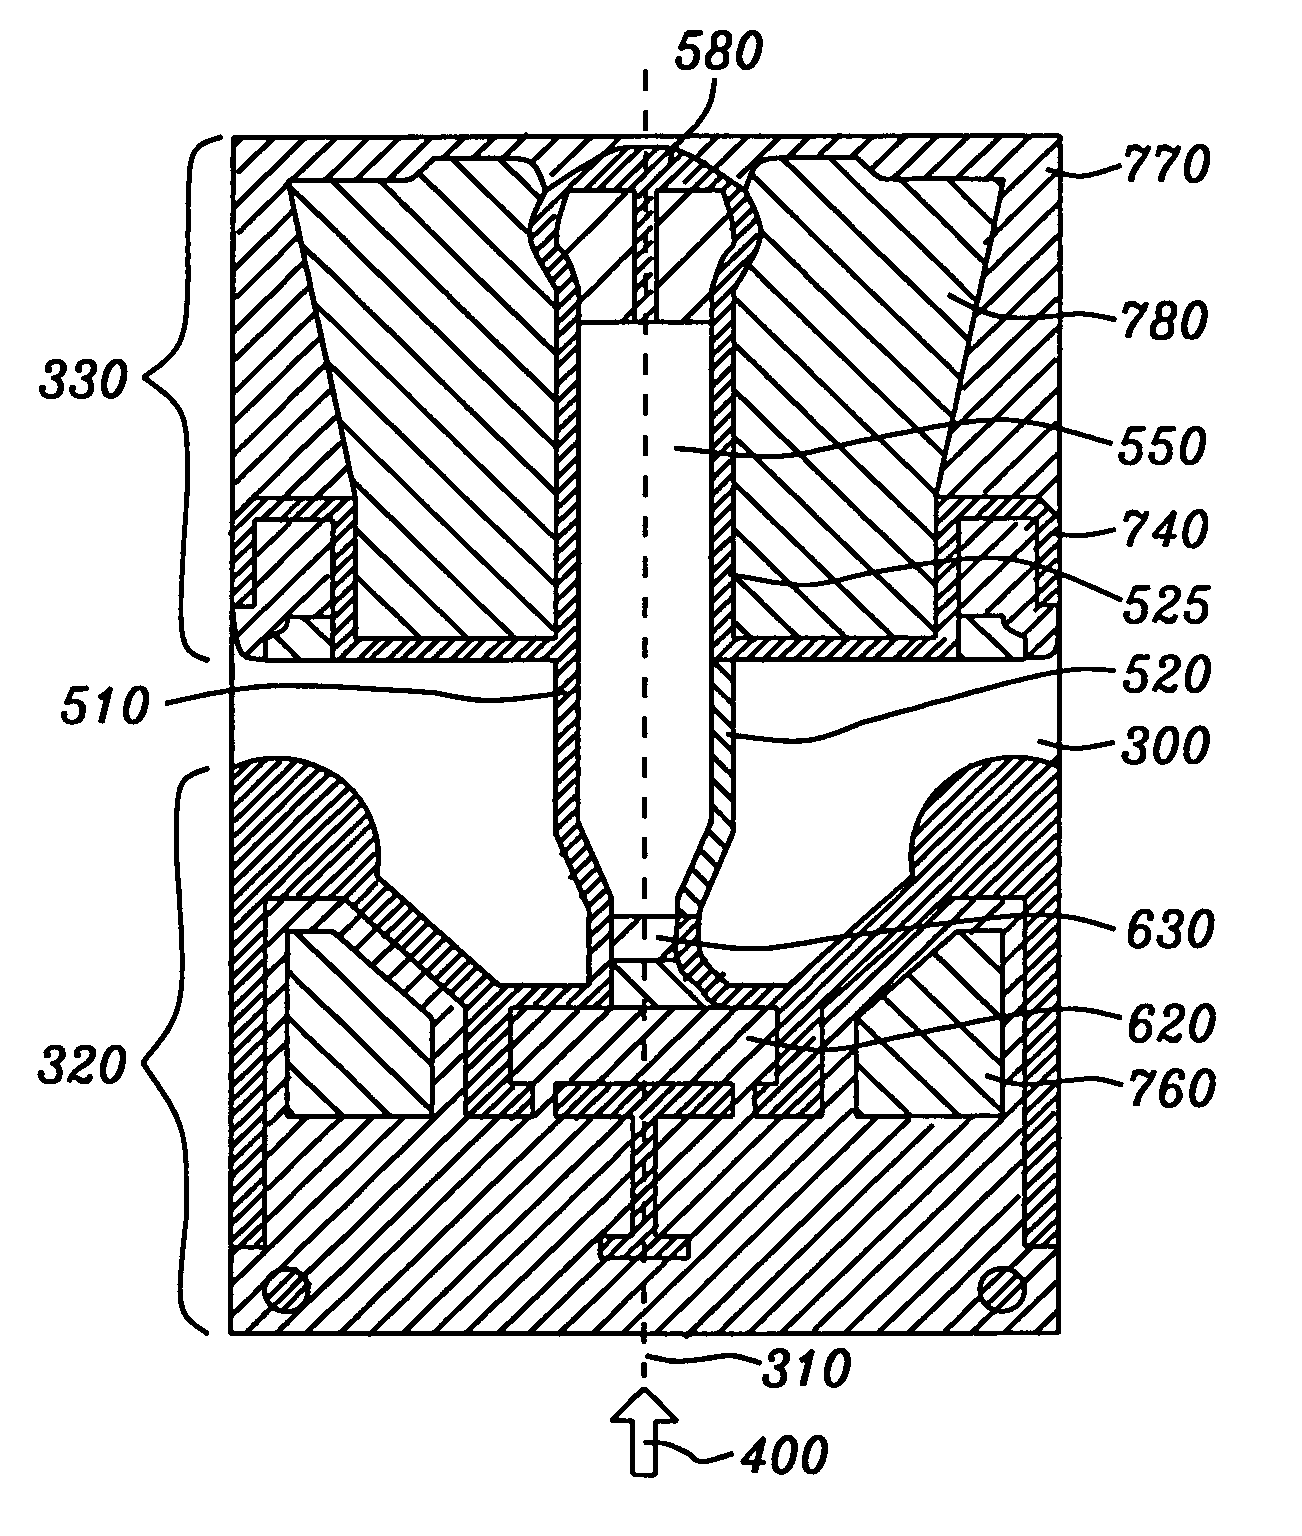 Air-bearing slider design for sub-nanometer clearance in hard disk drive (HDD)